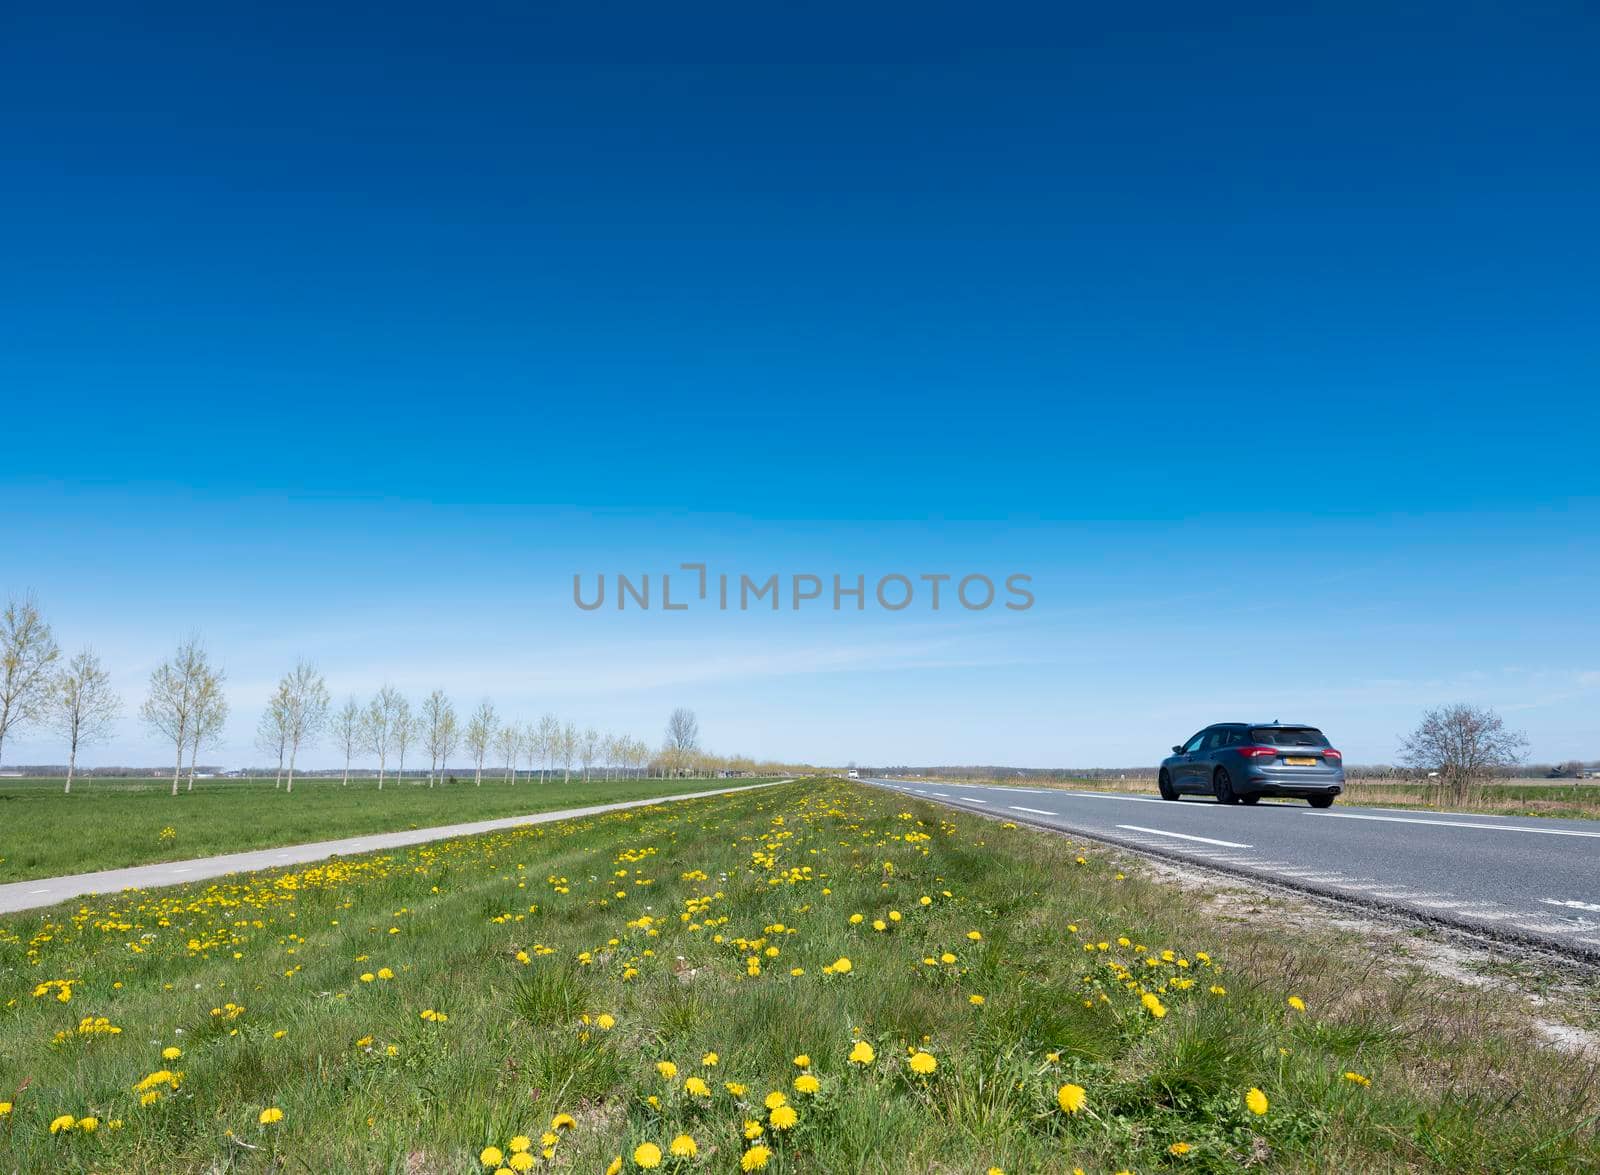 open spring landscape with road and car under blue sky in dutch province of flevoland by ahavelaar